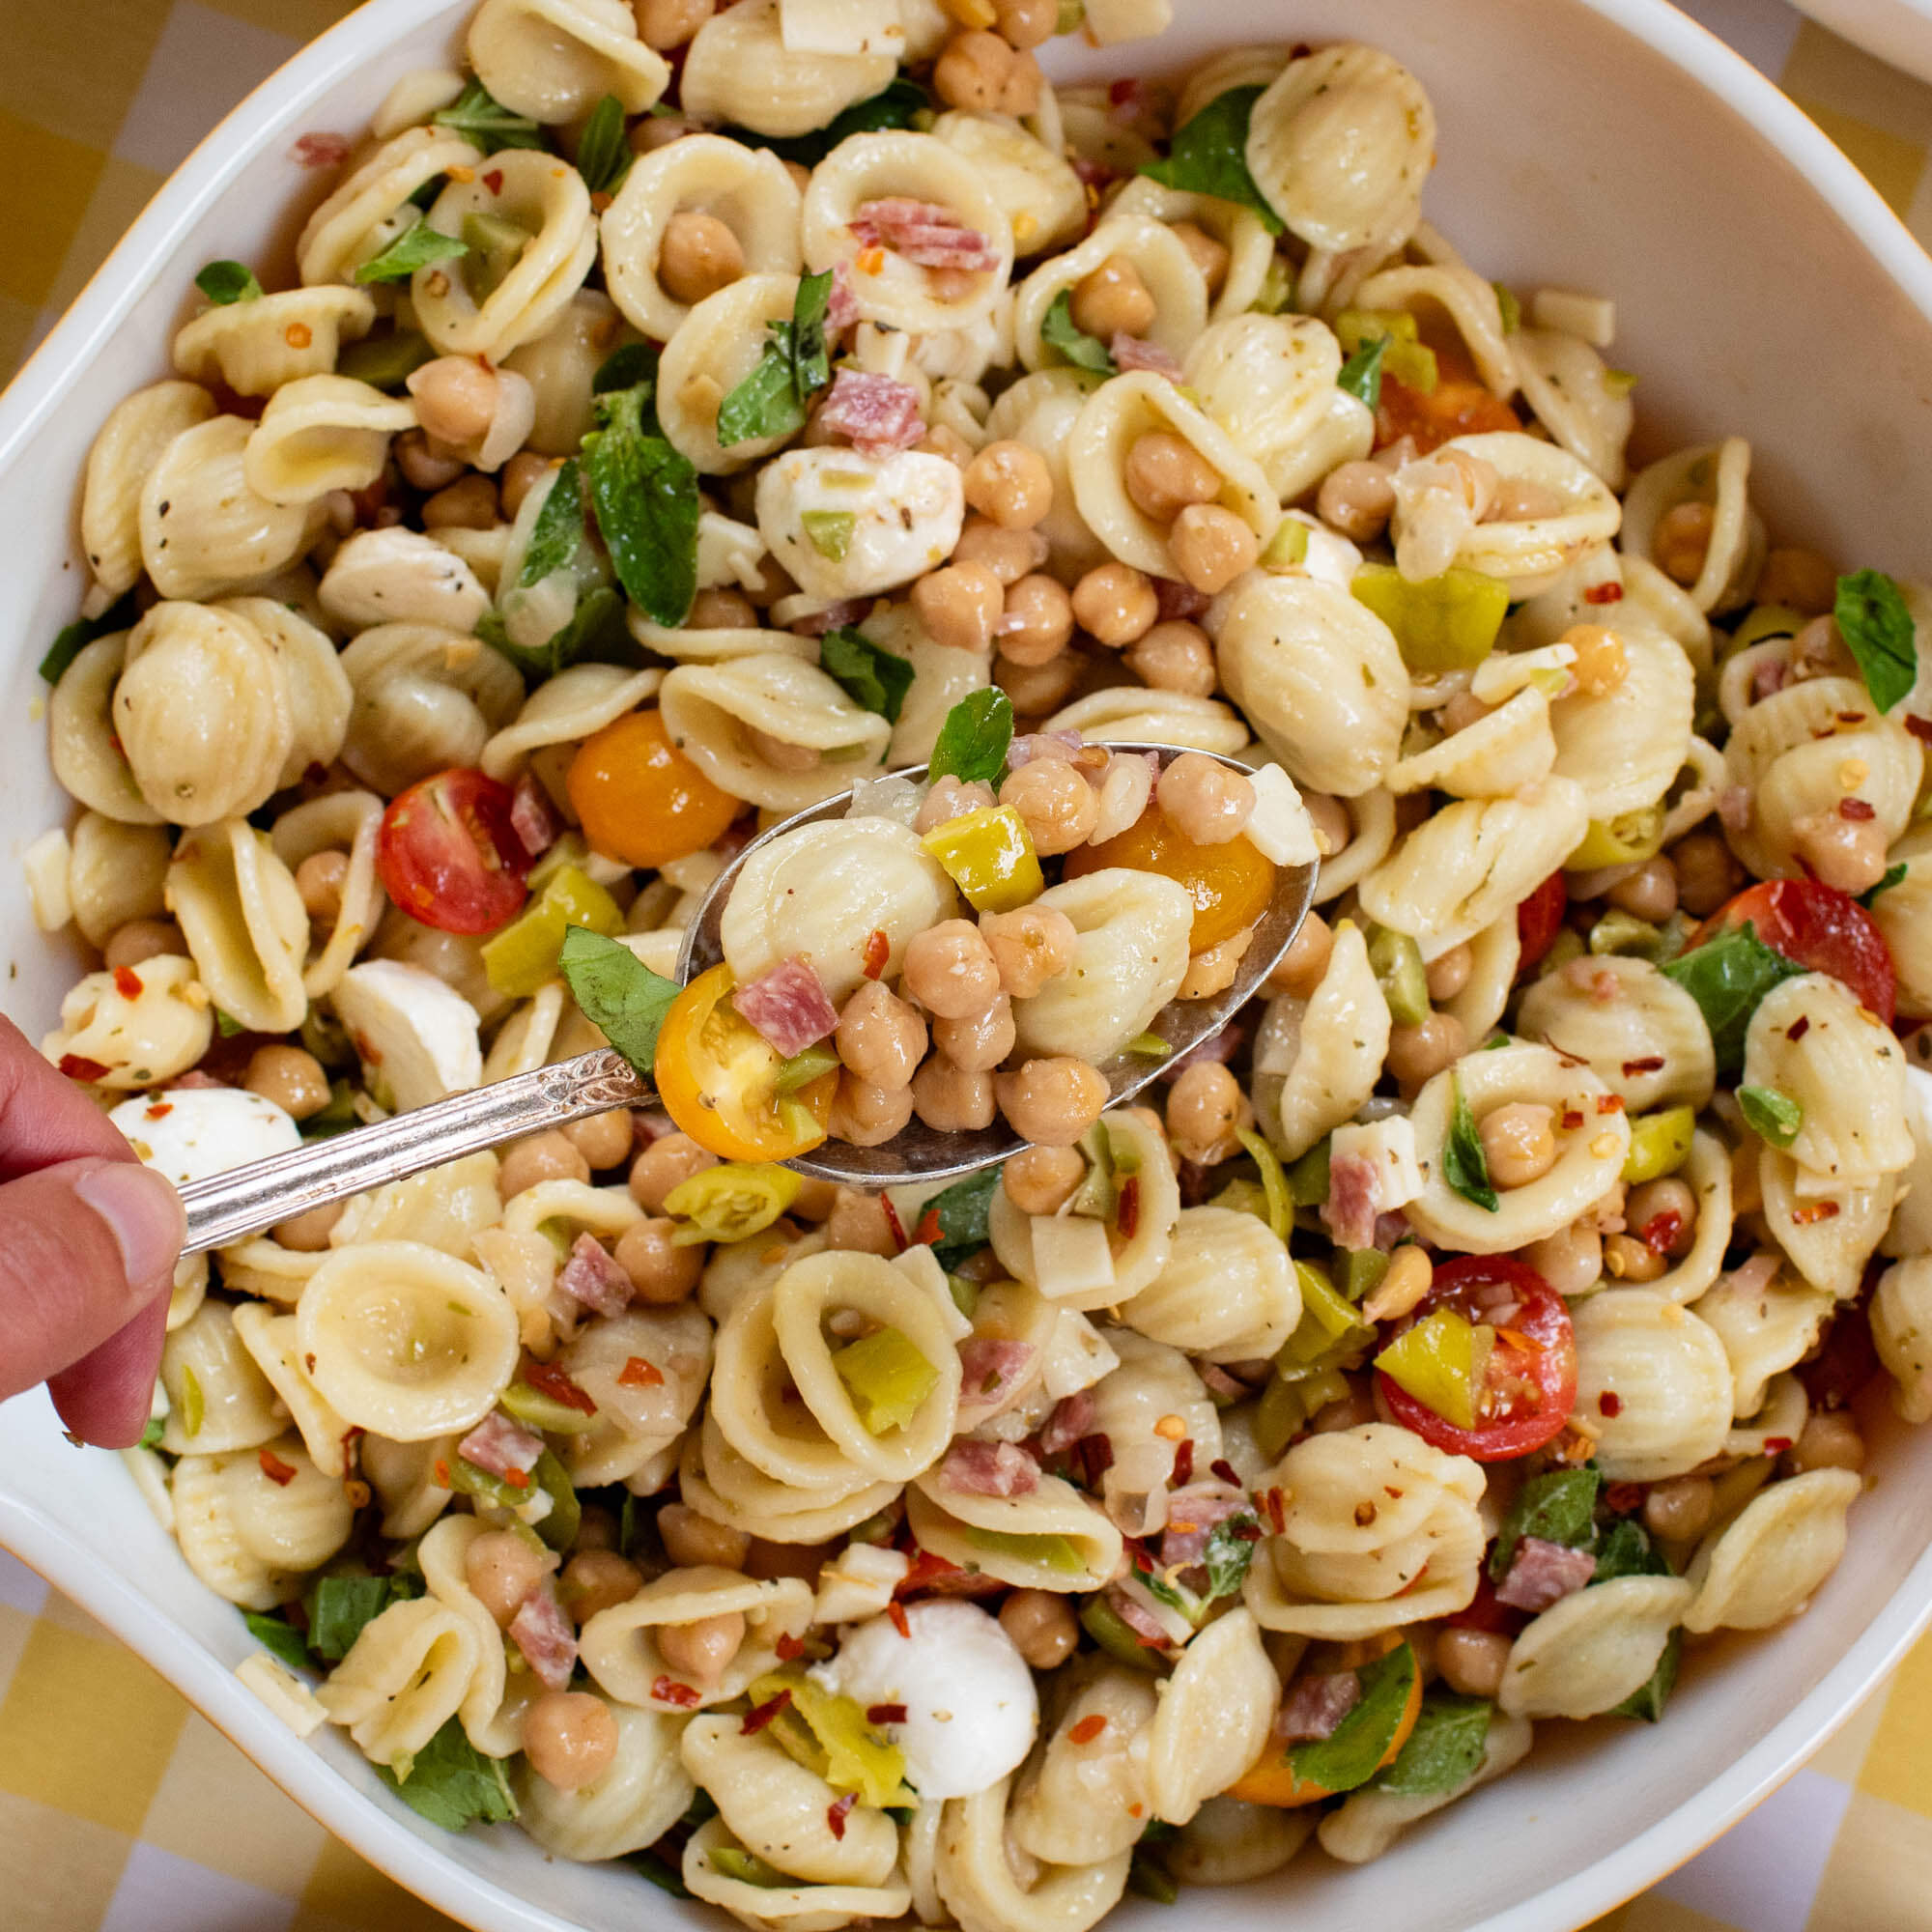 Hoagie-inspired pasta salad with Primary Beans chickpeas